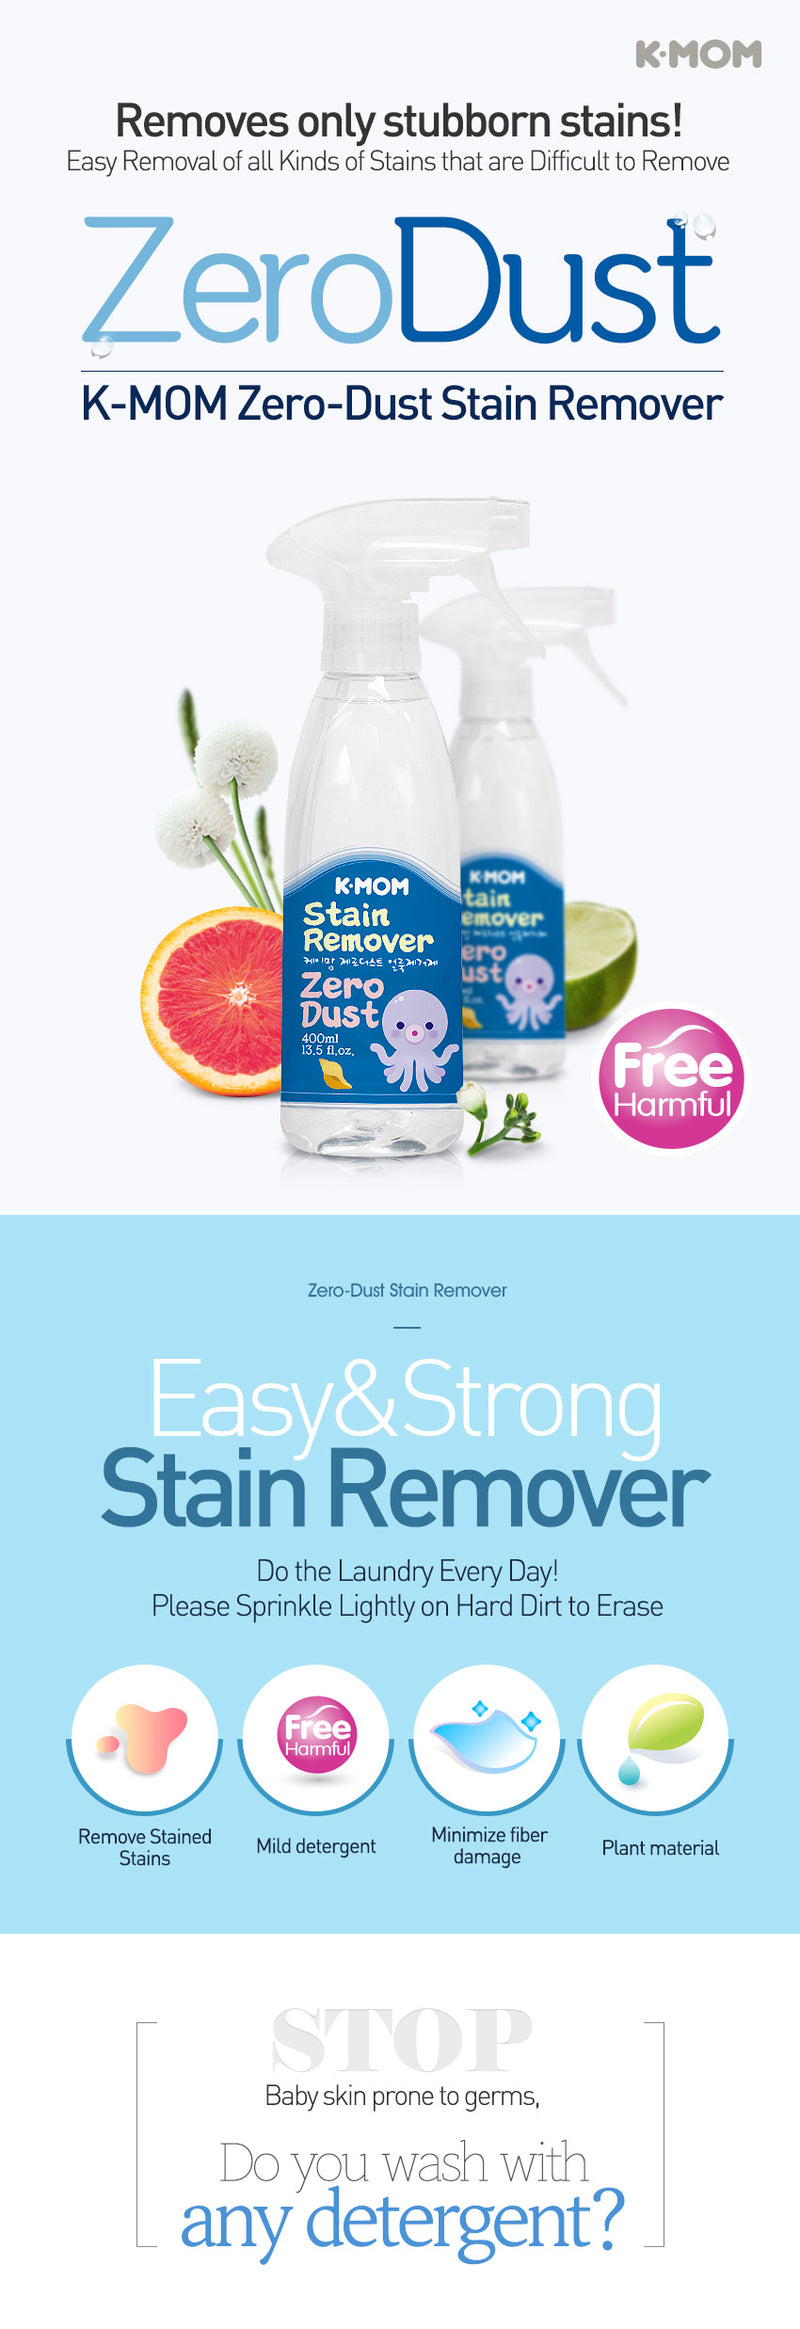 K-MOM ZERO-DUST STAIN REMOVER FRUITY FLORAL (moq 10)